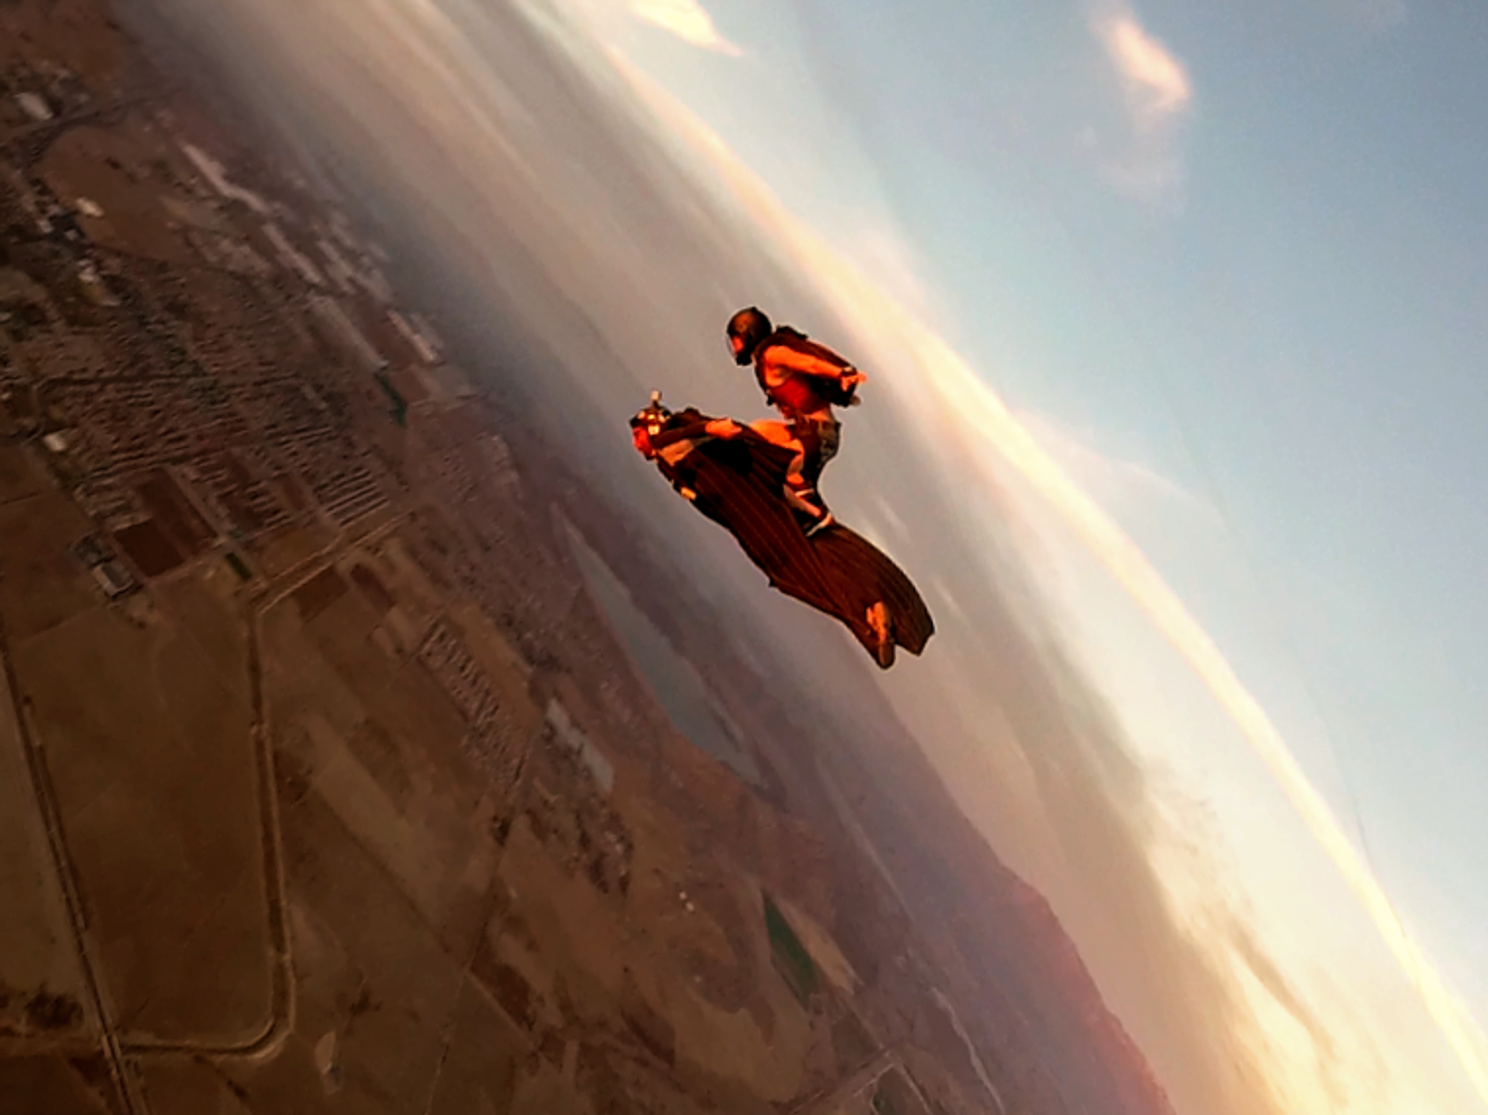 a skydiver standing on top of a wingsuiter at sunset